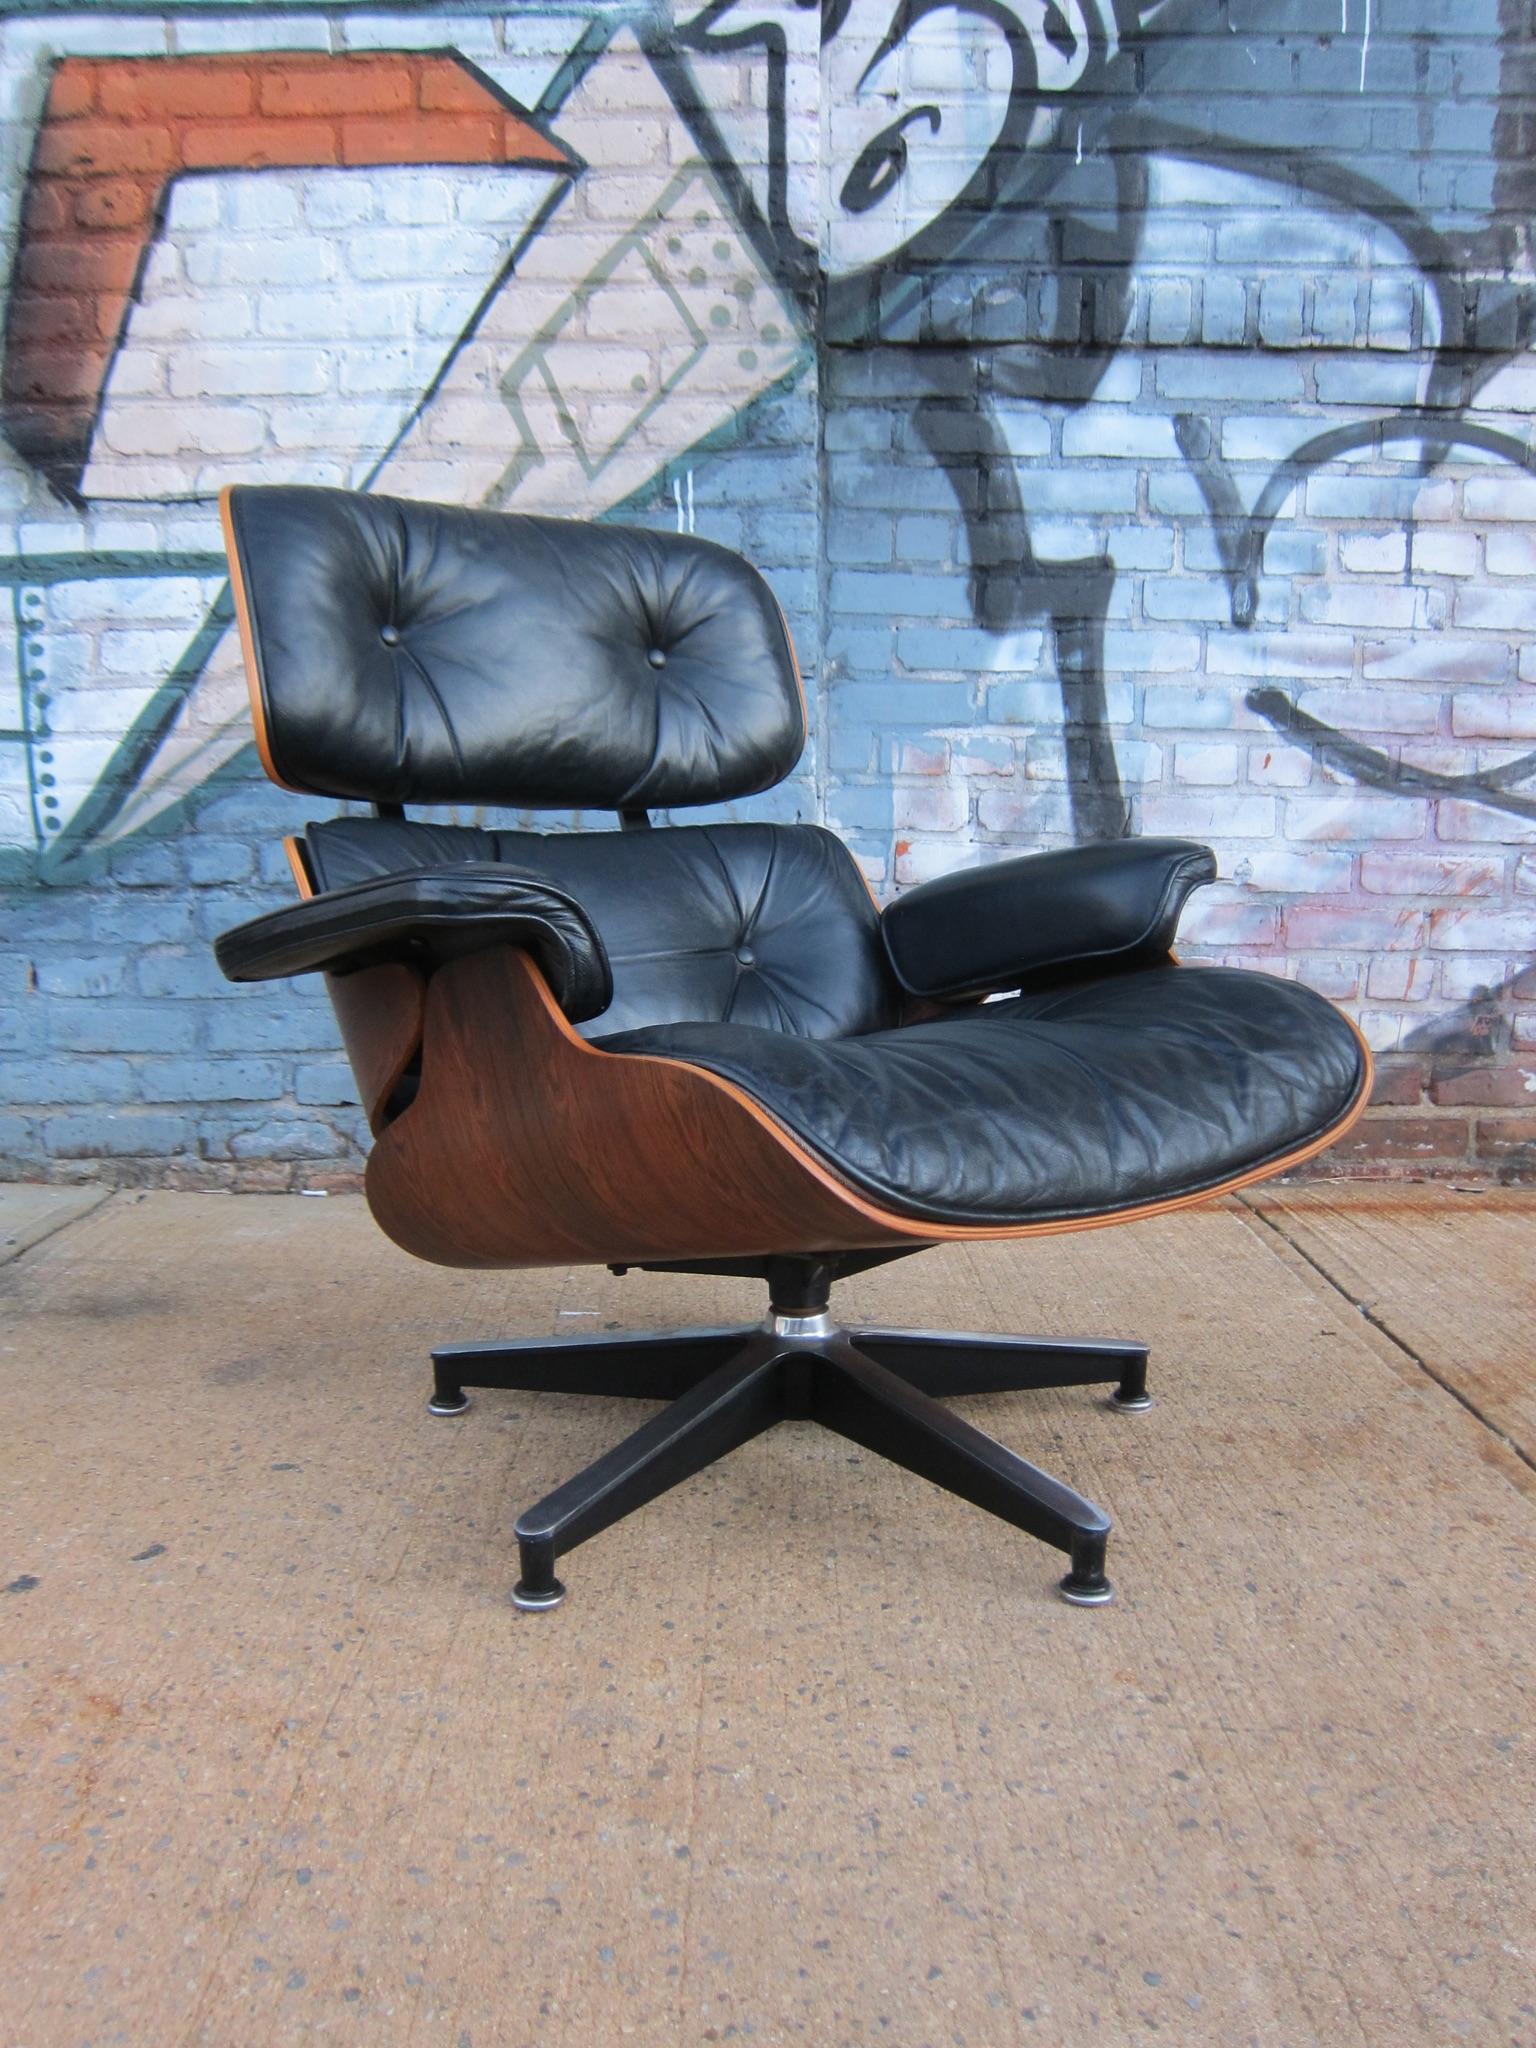 Eames lounge for Herman Miller, circa 1970s. In perfect condition. Gorgeous wood grains and detail.